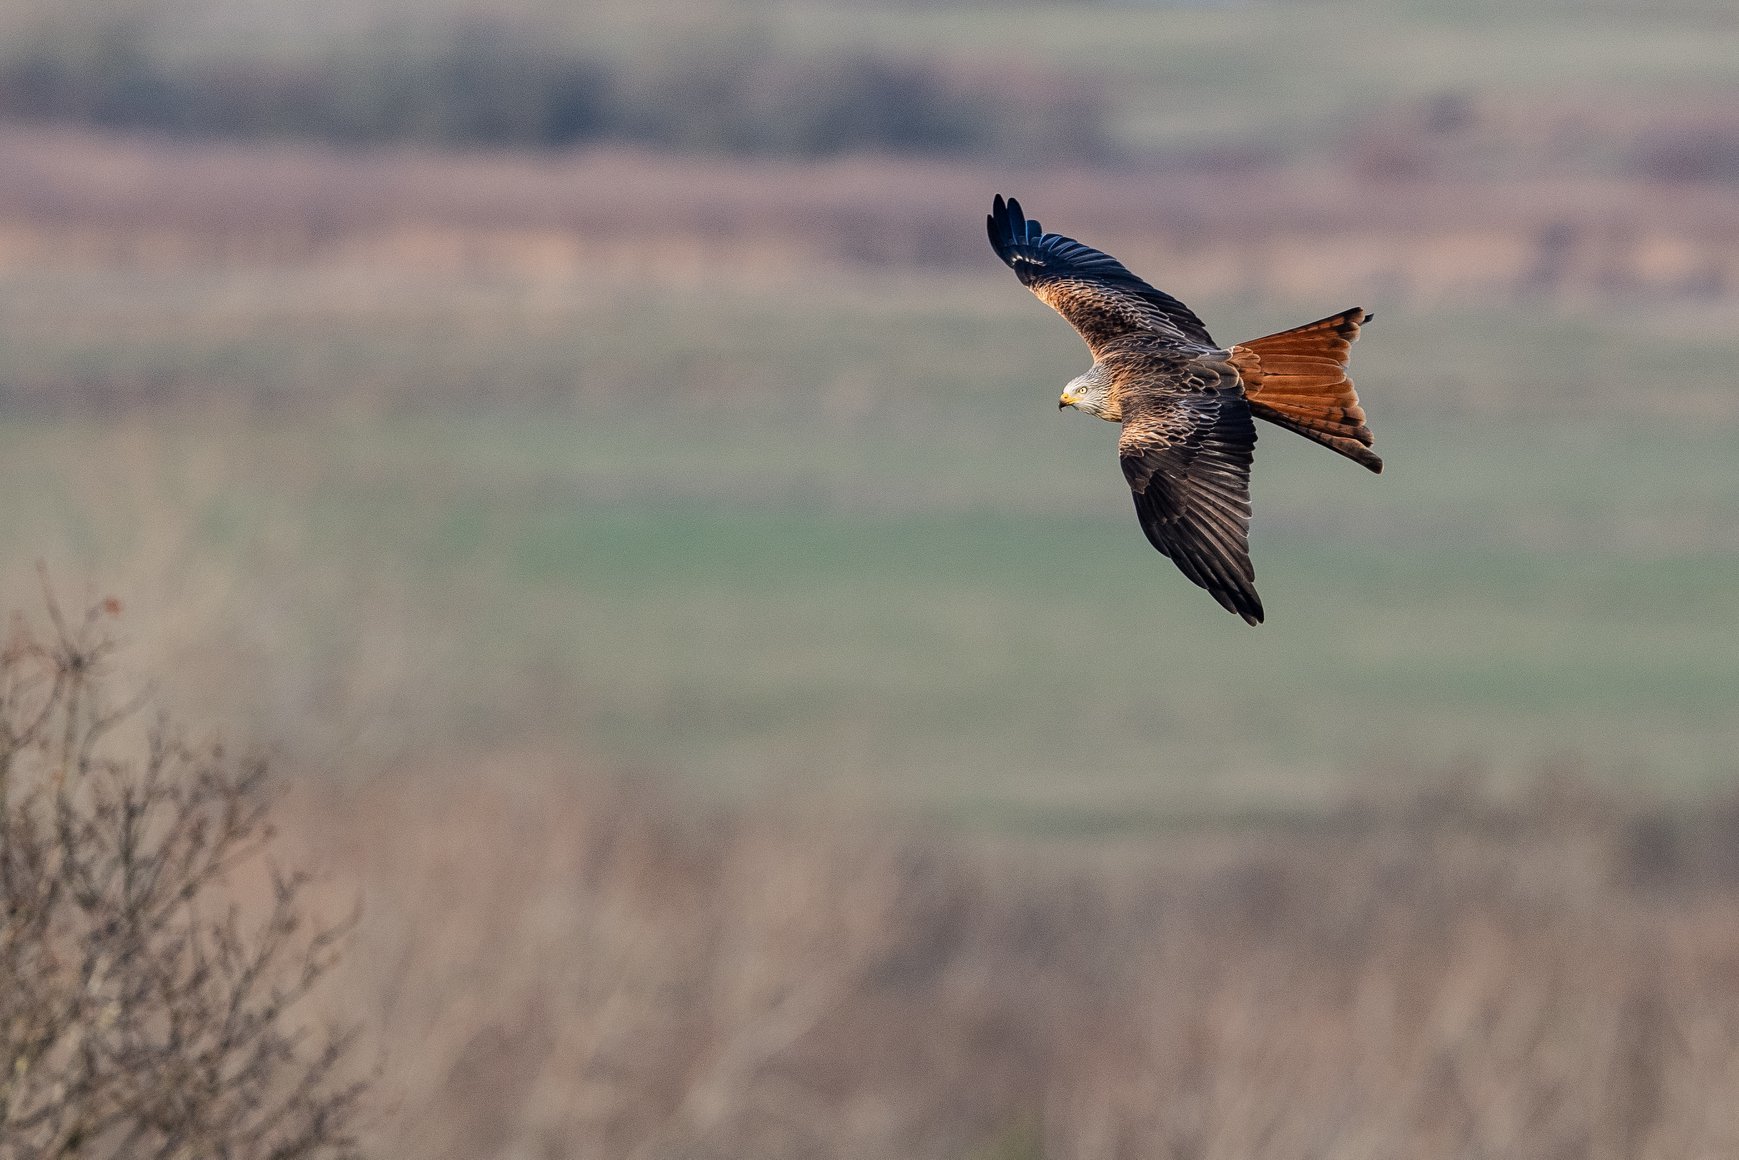 Red Tailed Kite at RSPB Otmoor, Oxfordshire by Anthony Morris3